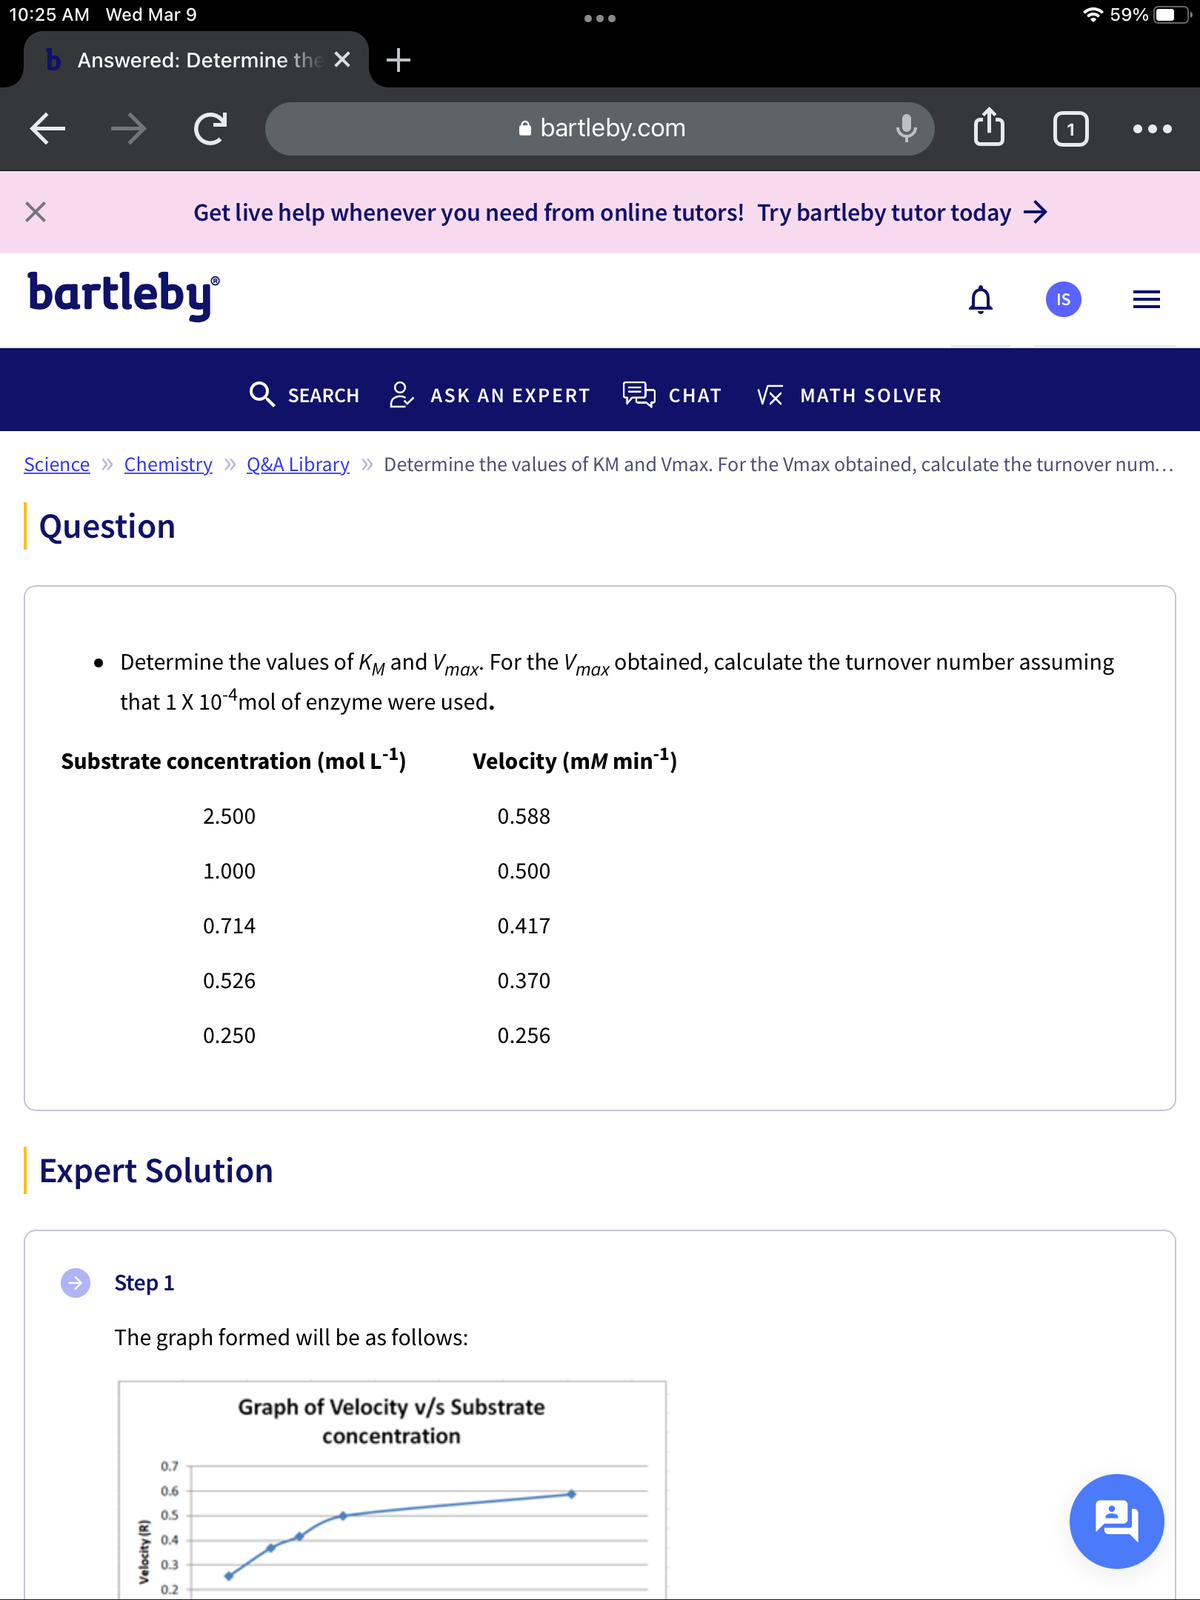 10:25 AM Wed Mar 9
A 59%
b Answered: Determine the X
+
a bartleby.com
Get live help whenever you need from online tutors! Try bartleby tutor today →
bartleby
IS
SEARCH
& ASK AN EXPERT
CHAT
Vx MATH SOLVER
Science » Chemistry » Q&A Library » Determine the values of KM and Vmax. For the Vmax obtained, calculate the turnover num...
Question
• Determine the values of Ky and Vmax. For the V,
obtained, calculate the turnover number assuming
тах*
таx
that 1X 104mol of enzyme were used.
Substrate concentration (mol L²)
Velocity (mM min 1)
2.500
0.588
1.000
0.500
0.714
0.417
0.526
0.370
0.250
0.256
Expert Solution
Step 1
The graph formed will be as follows:
Graph of Velocity v/s Substrate
concentration
0.7
0.6
0.5
0.4
0.3
0.2
Velocity (R)
